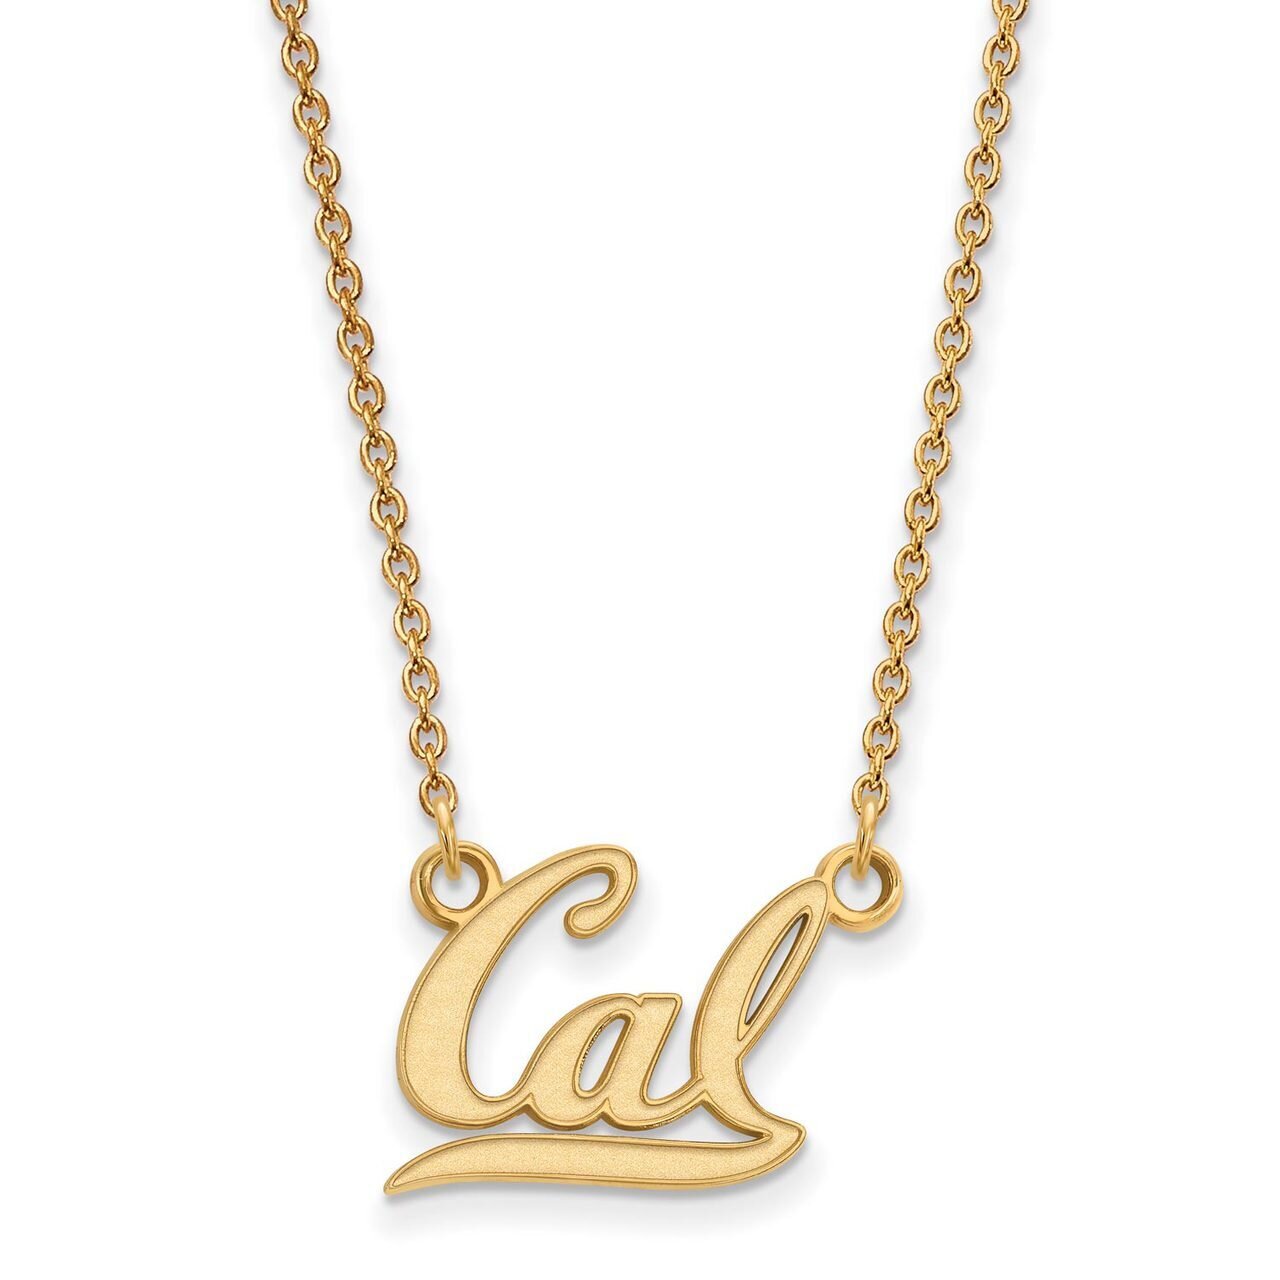 University of California Berkeley Small Pendant with Chain Necklace 10k Yellow Gold 1Y011UCB-18